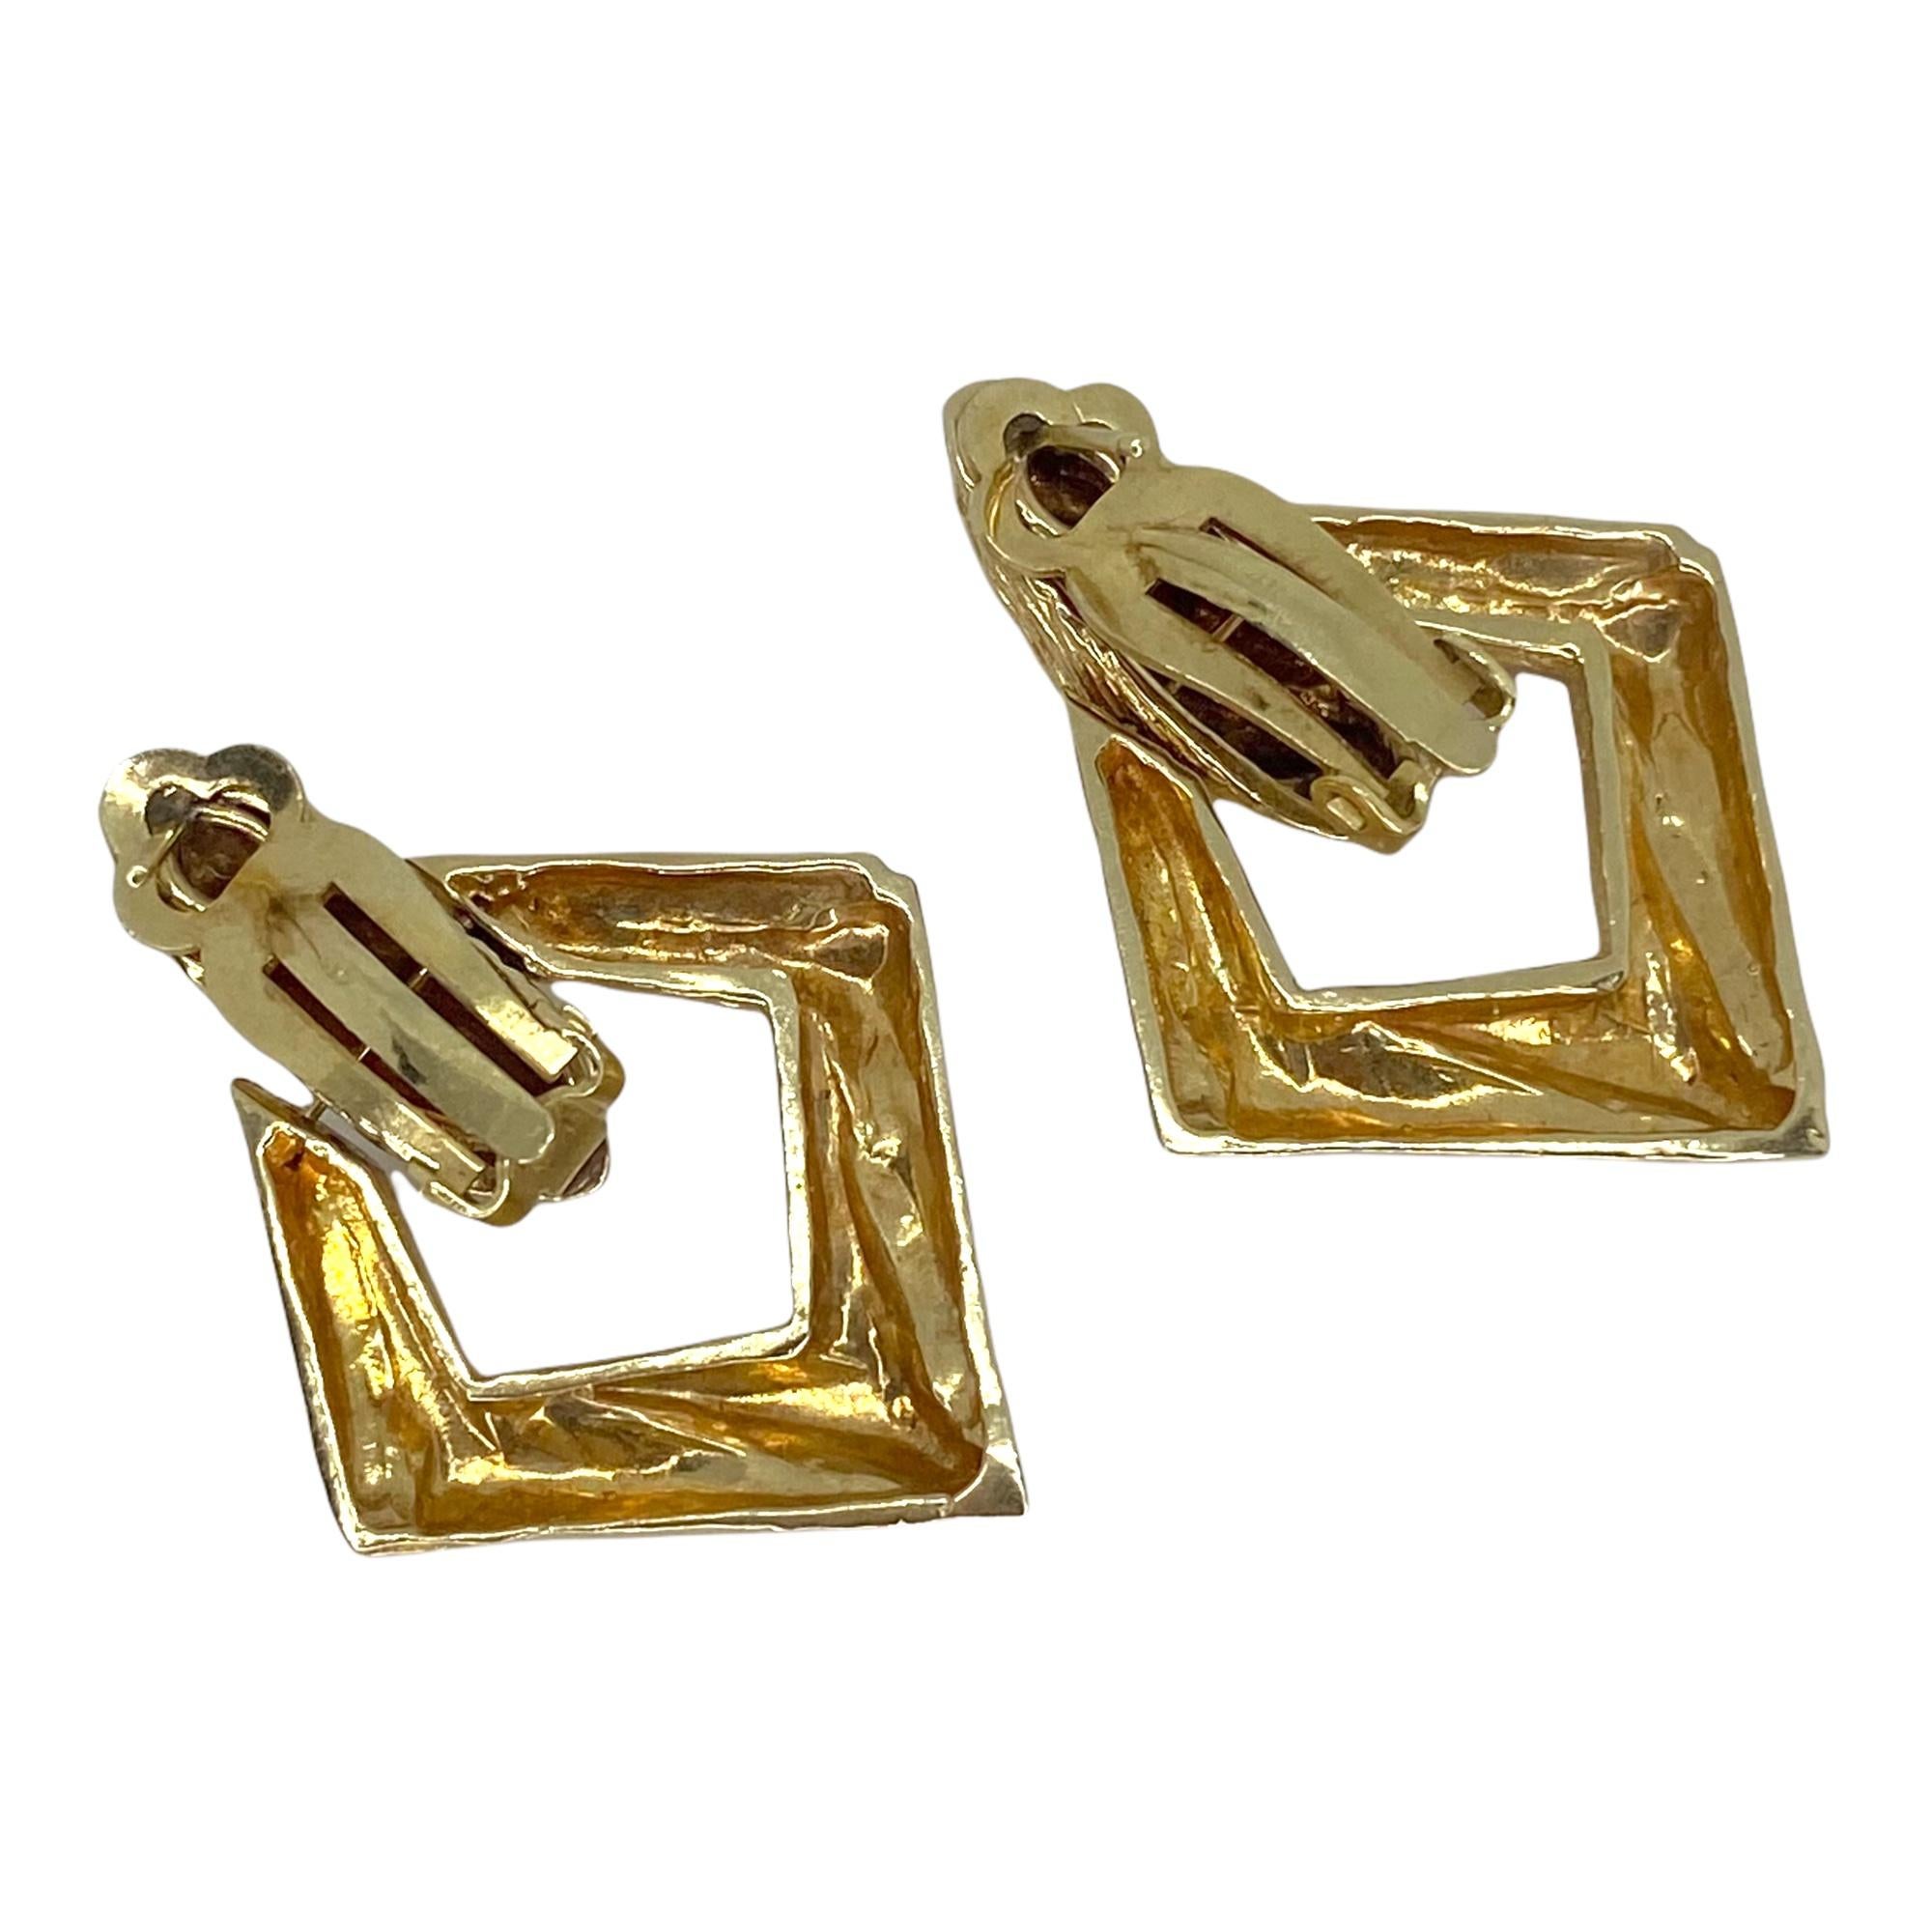 Vintage 14K yellow gold large diamond shape door knocker style earrings with textured finish.
Measurements:
Length: 1.5 inch
Width: 1 1/8 inch
Weight: 19.7 grams
Marked 14K